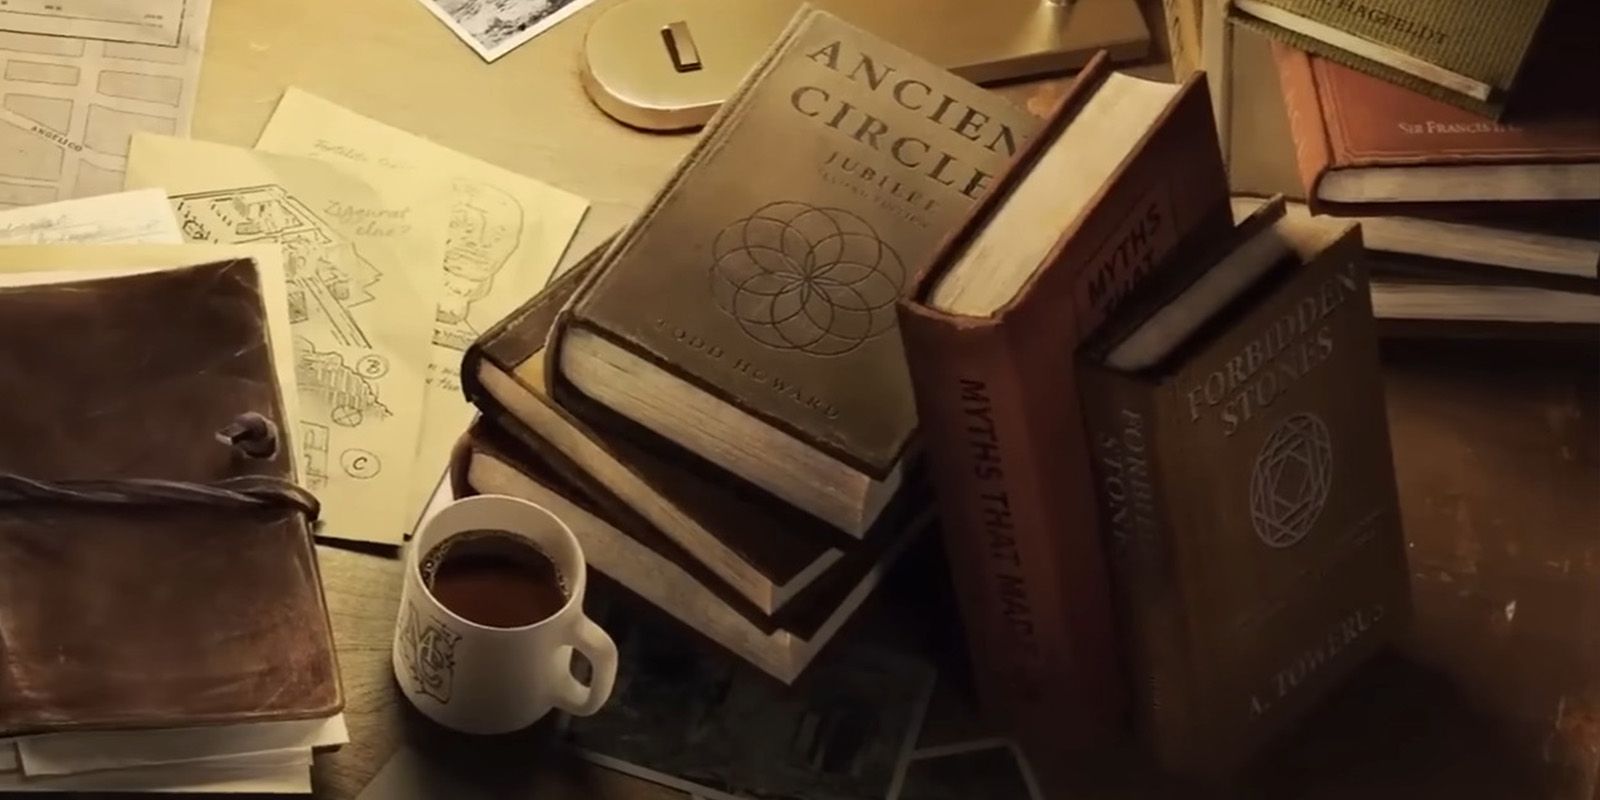 A stack of books on archaeology and myths in the teaser for the upcoming Indiana Jones game.